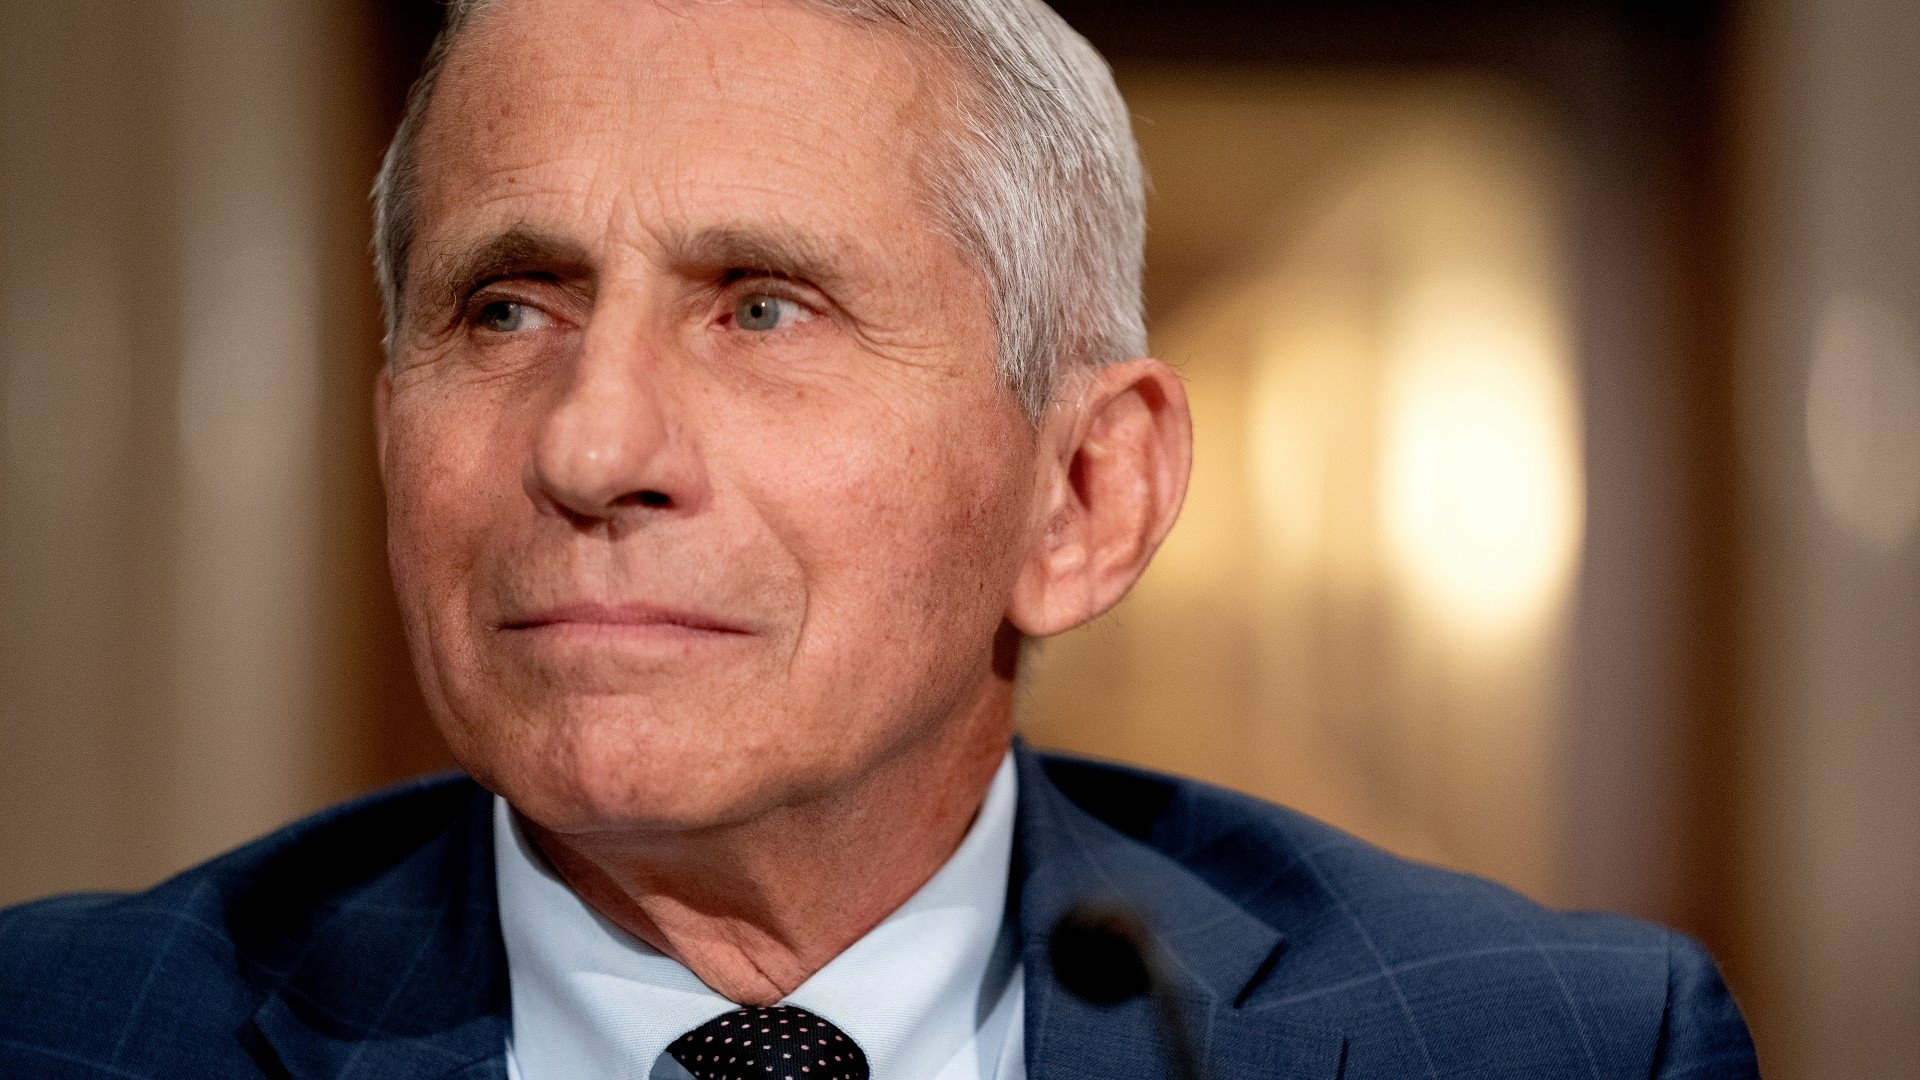 Fauci says he will 'probably' retire by the end of Biden's first term